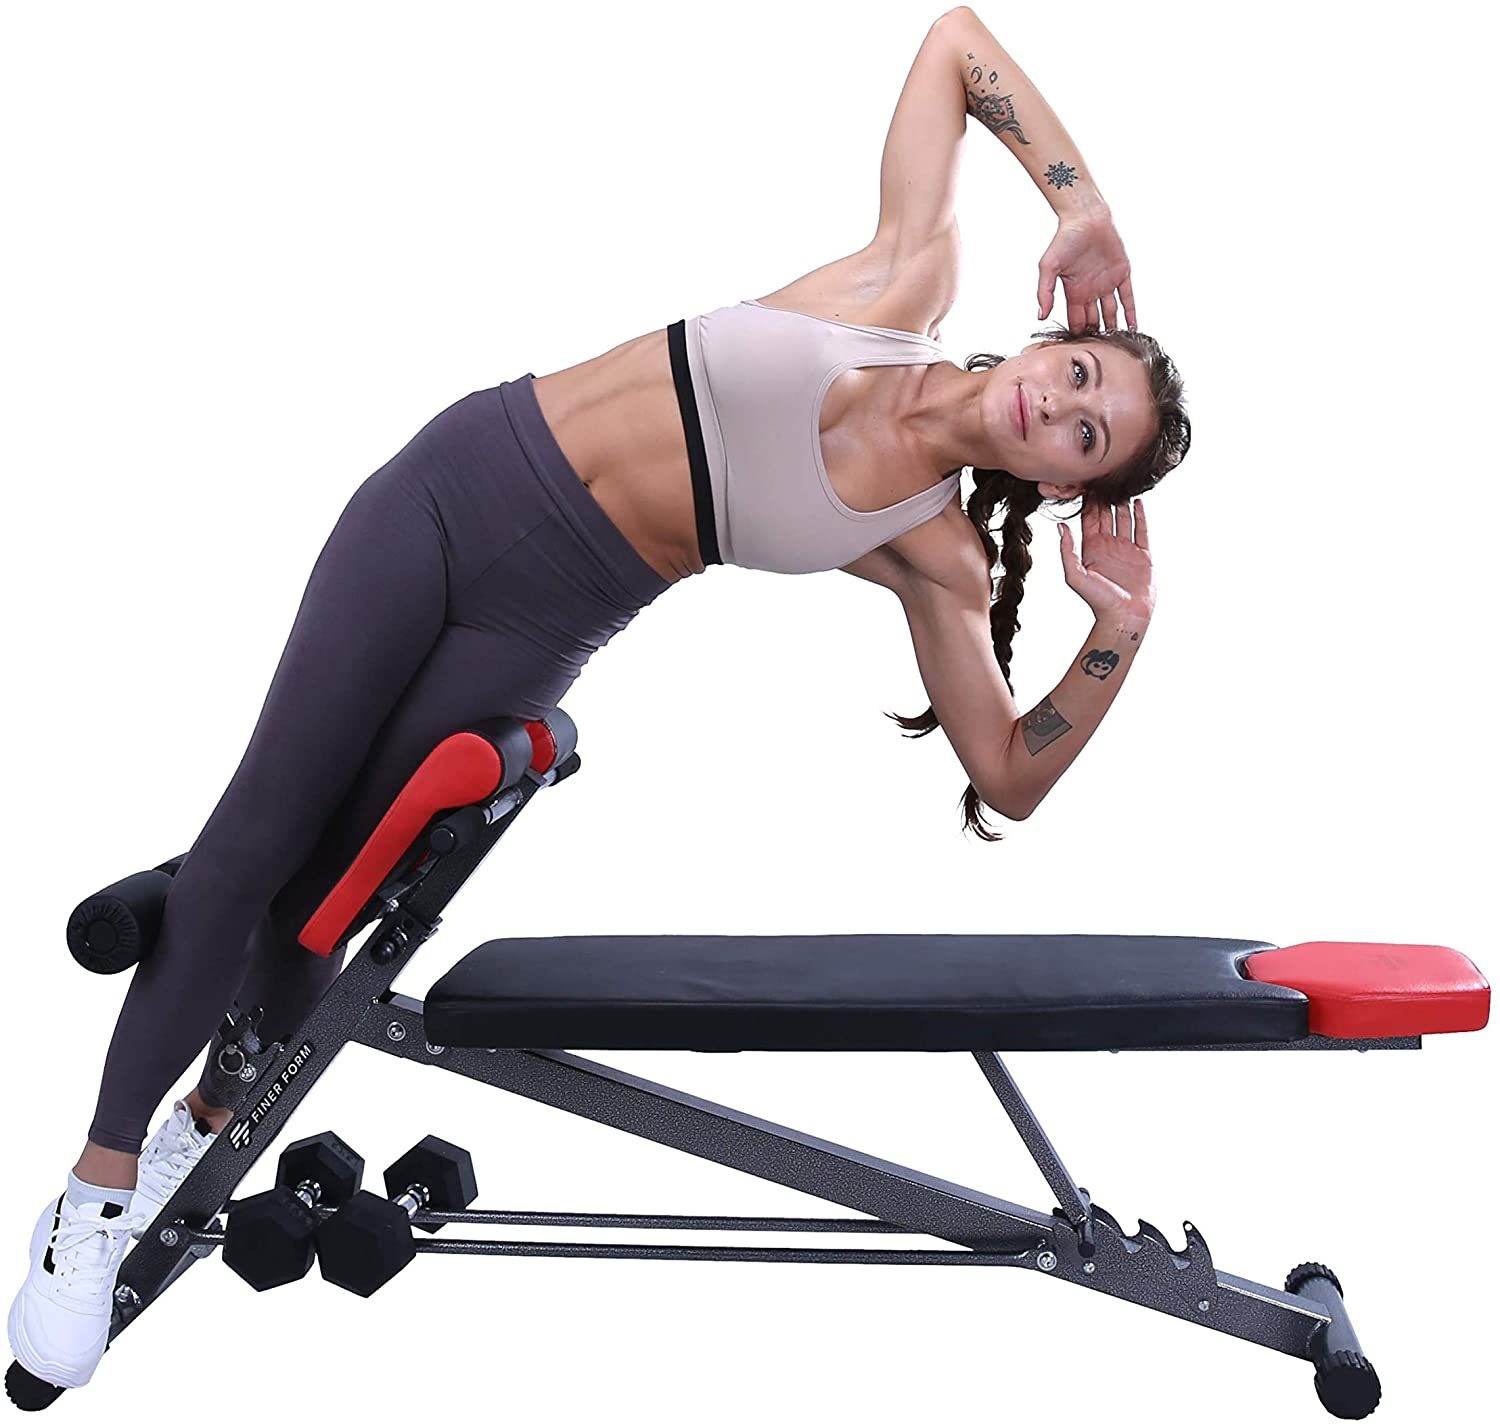 Finer Form Multi-Functional Weight Bench for Full All-in-One Body Workout